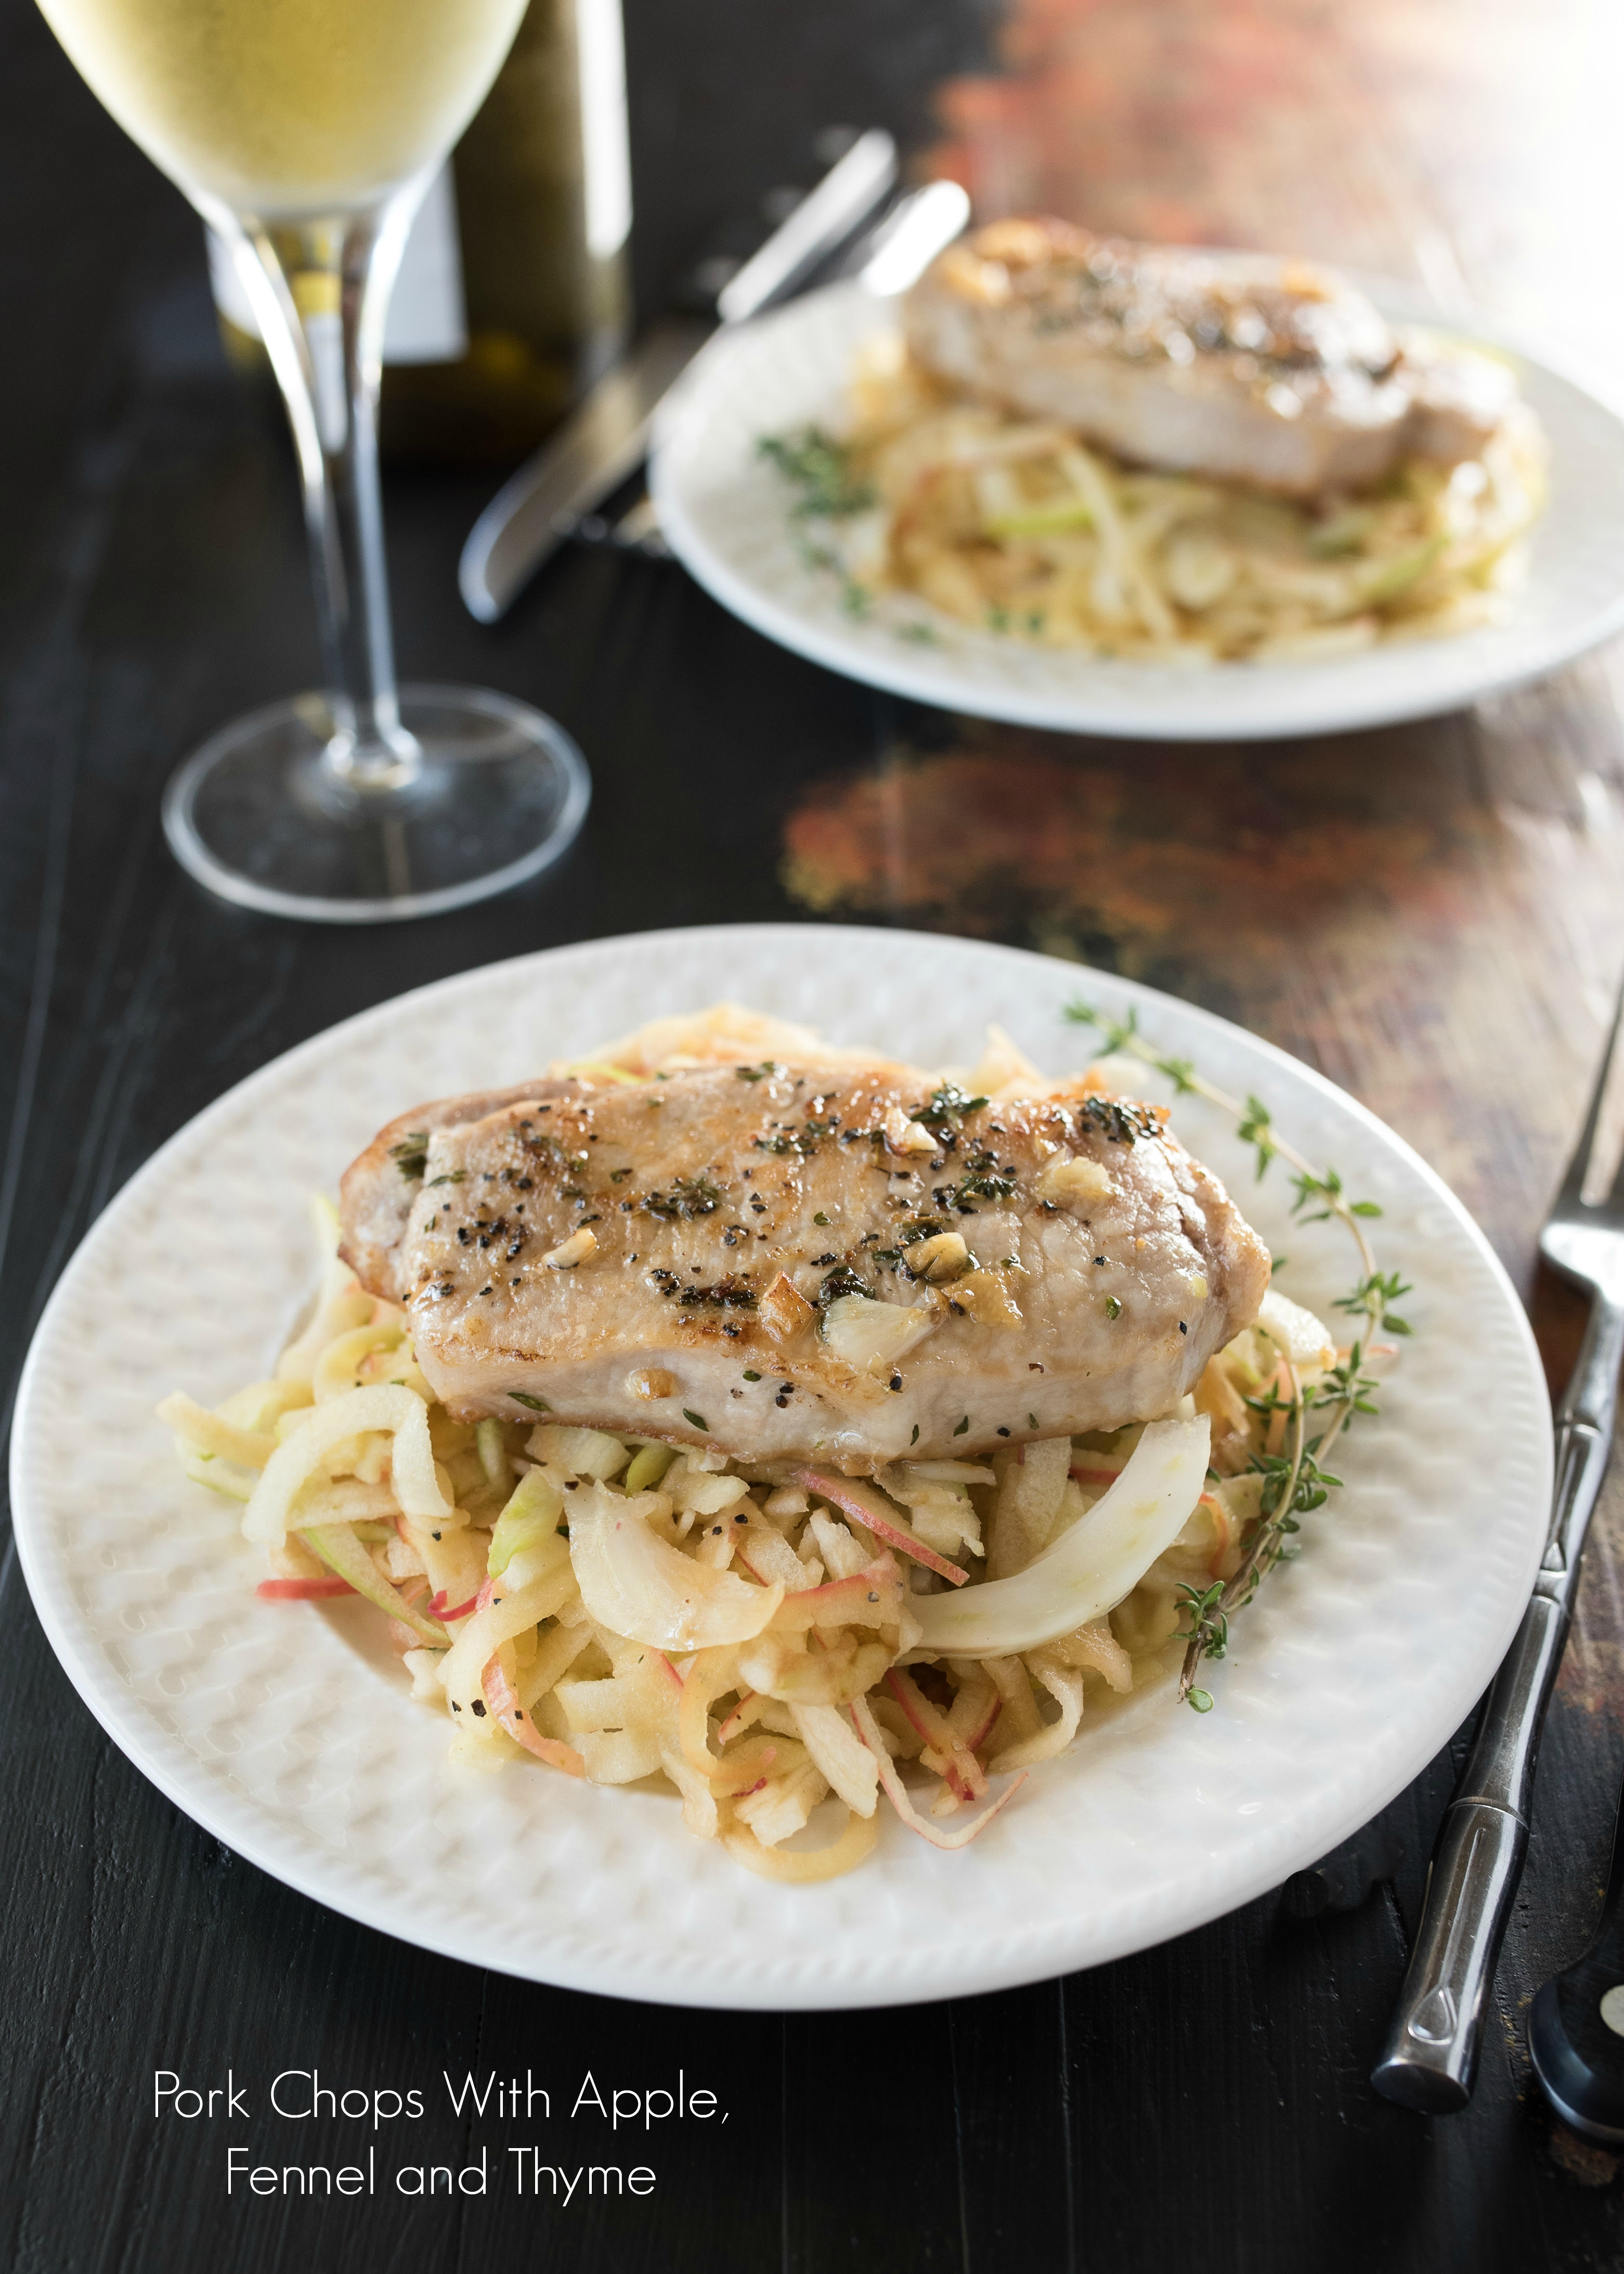 Pork Chops With Apple, Fennel and Thyme